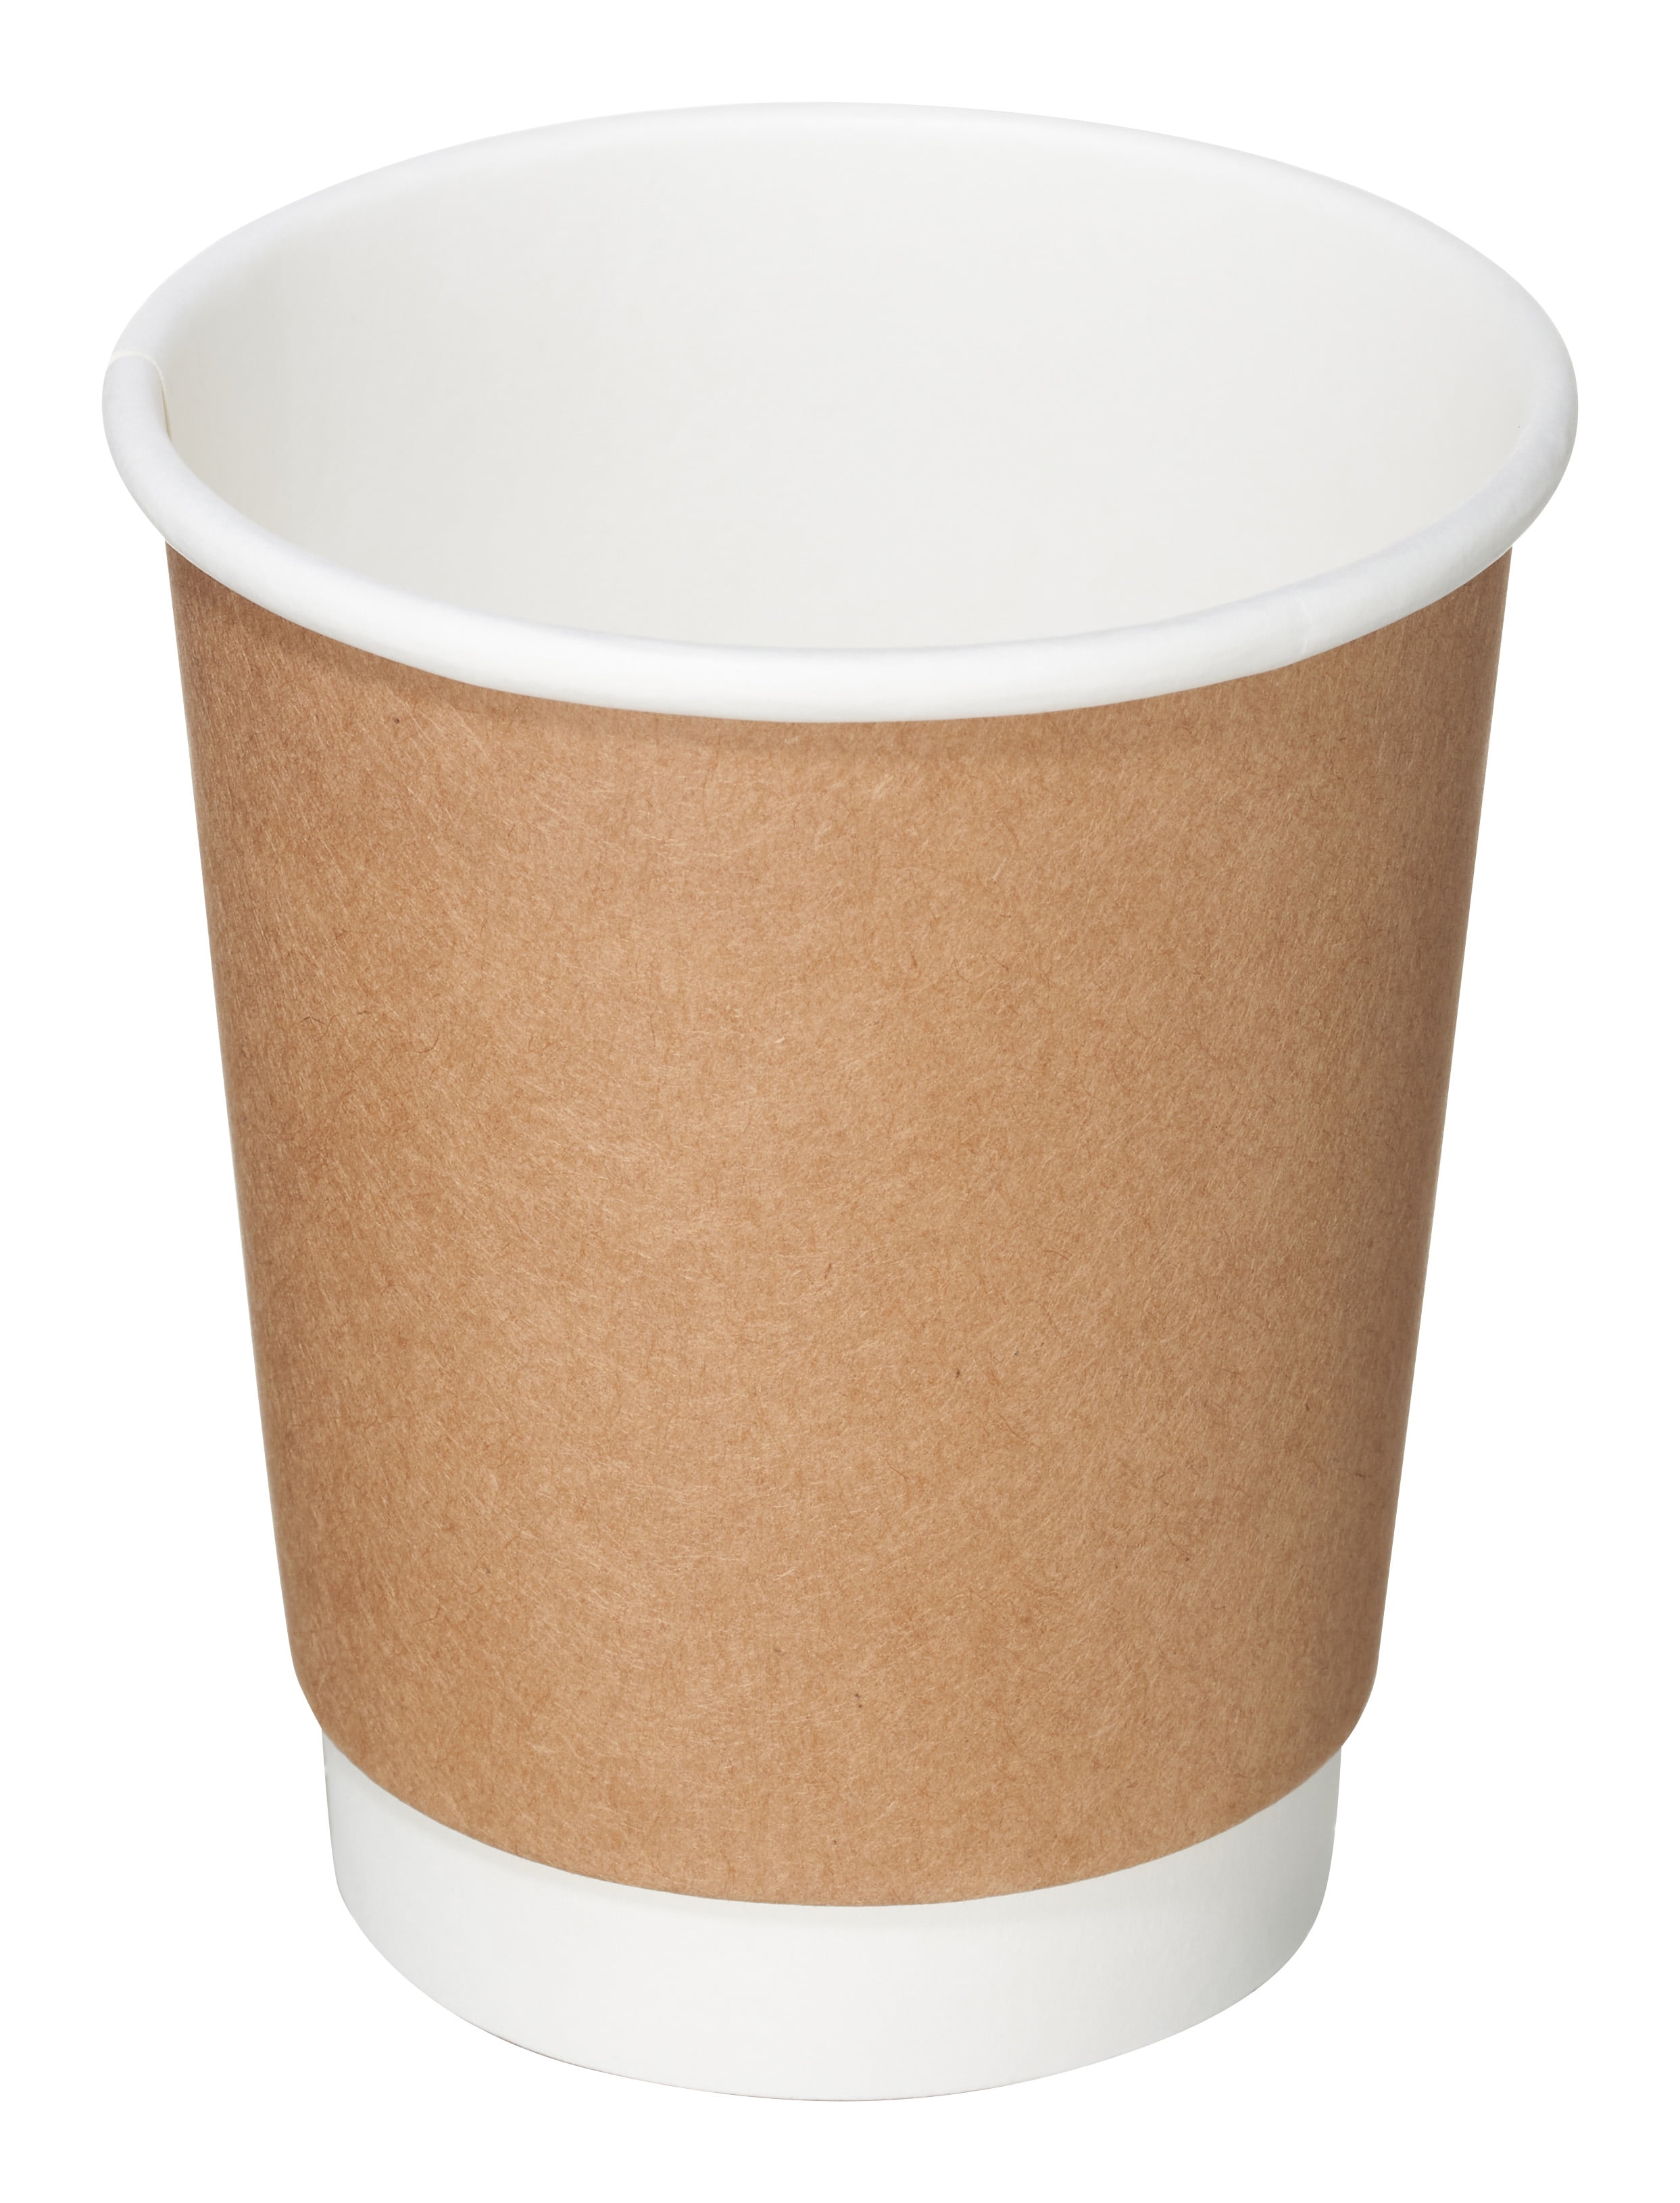 100-1000 Disposable Hot Drink Takeaway Paper Cups Tea Coffee 6oz 170ml Capacity 